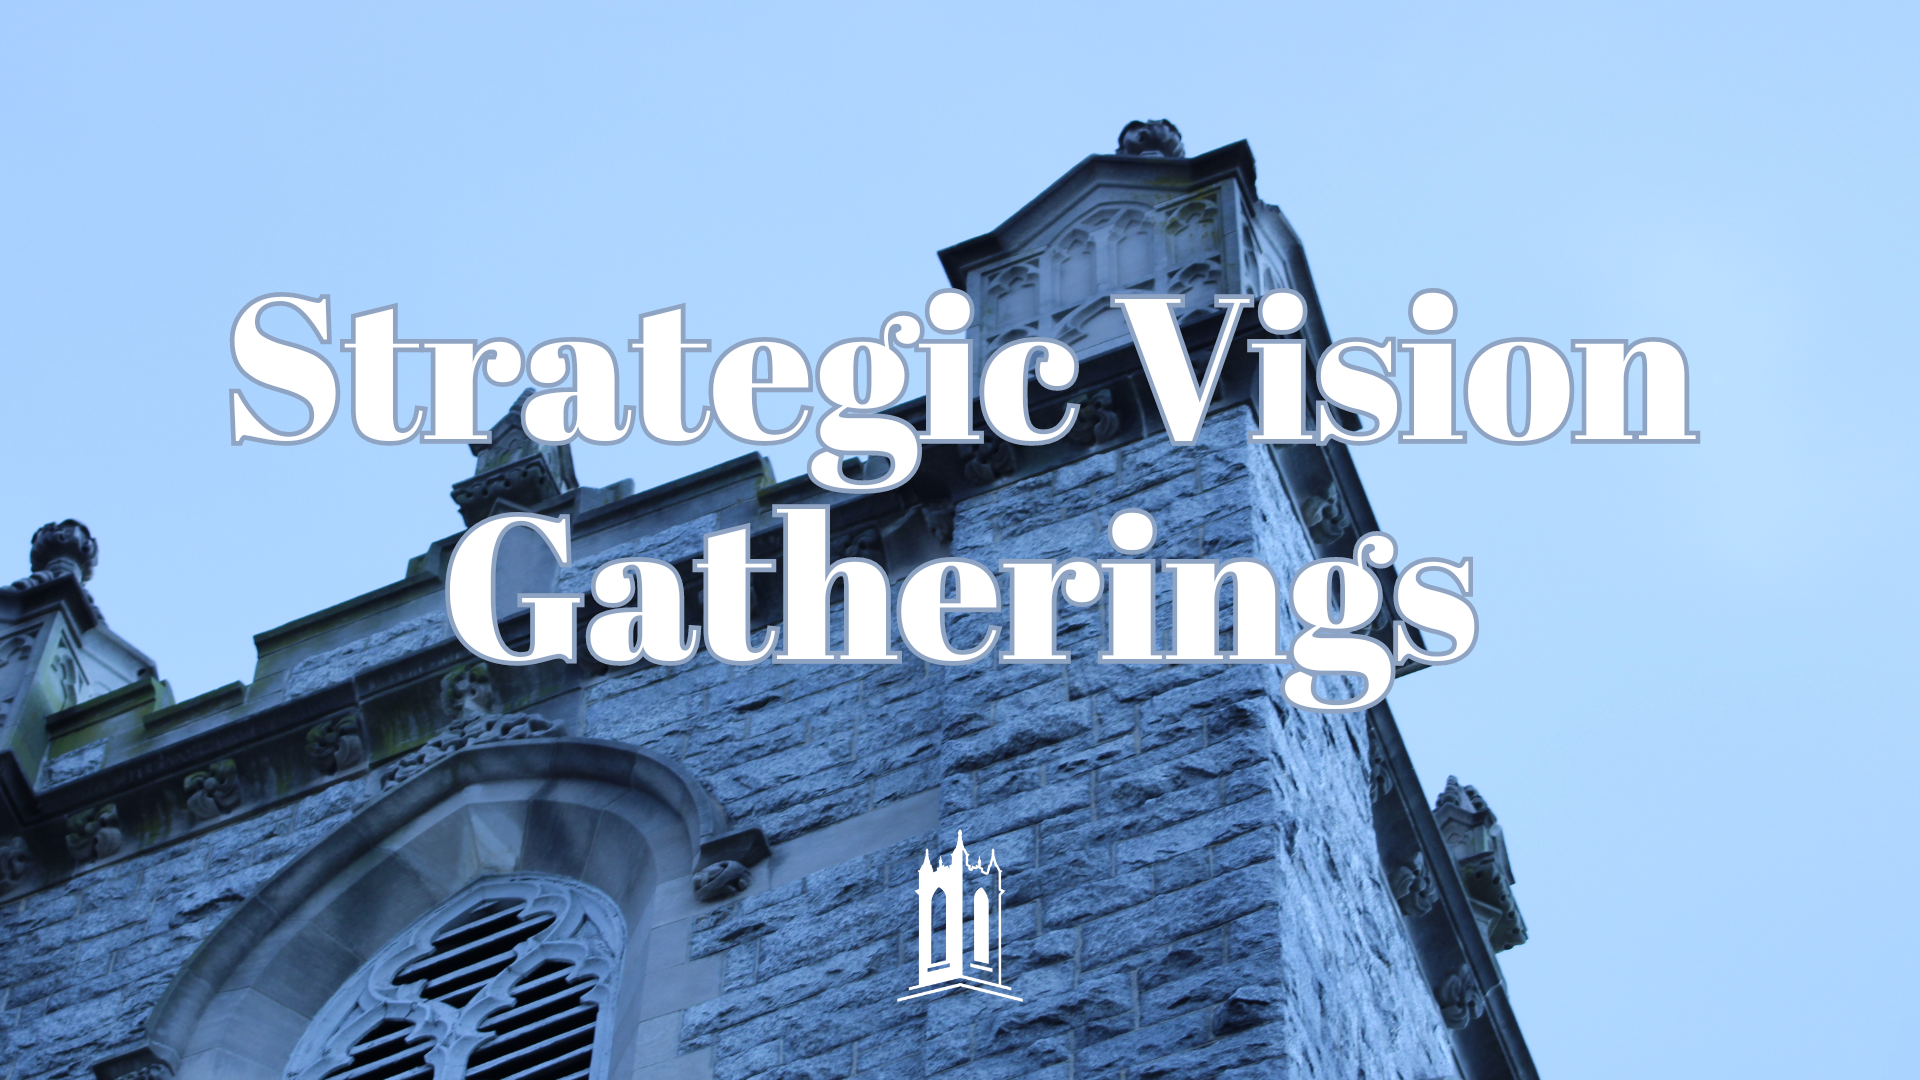 Strategic Vision Gathering: Northwest D.C., facilitated by Amanda Beadle at the home of Ann Brown and Terry Birkel